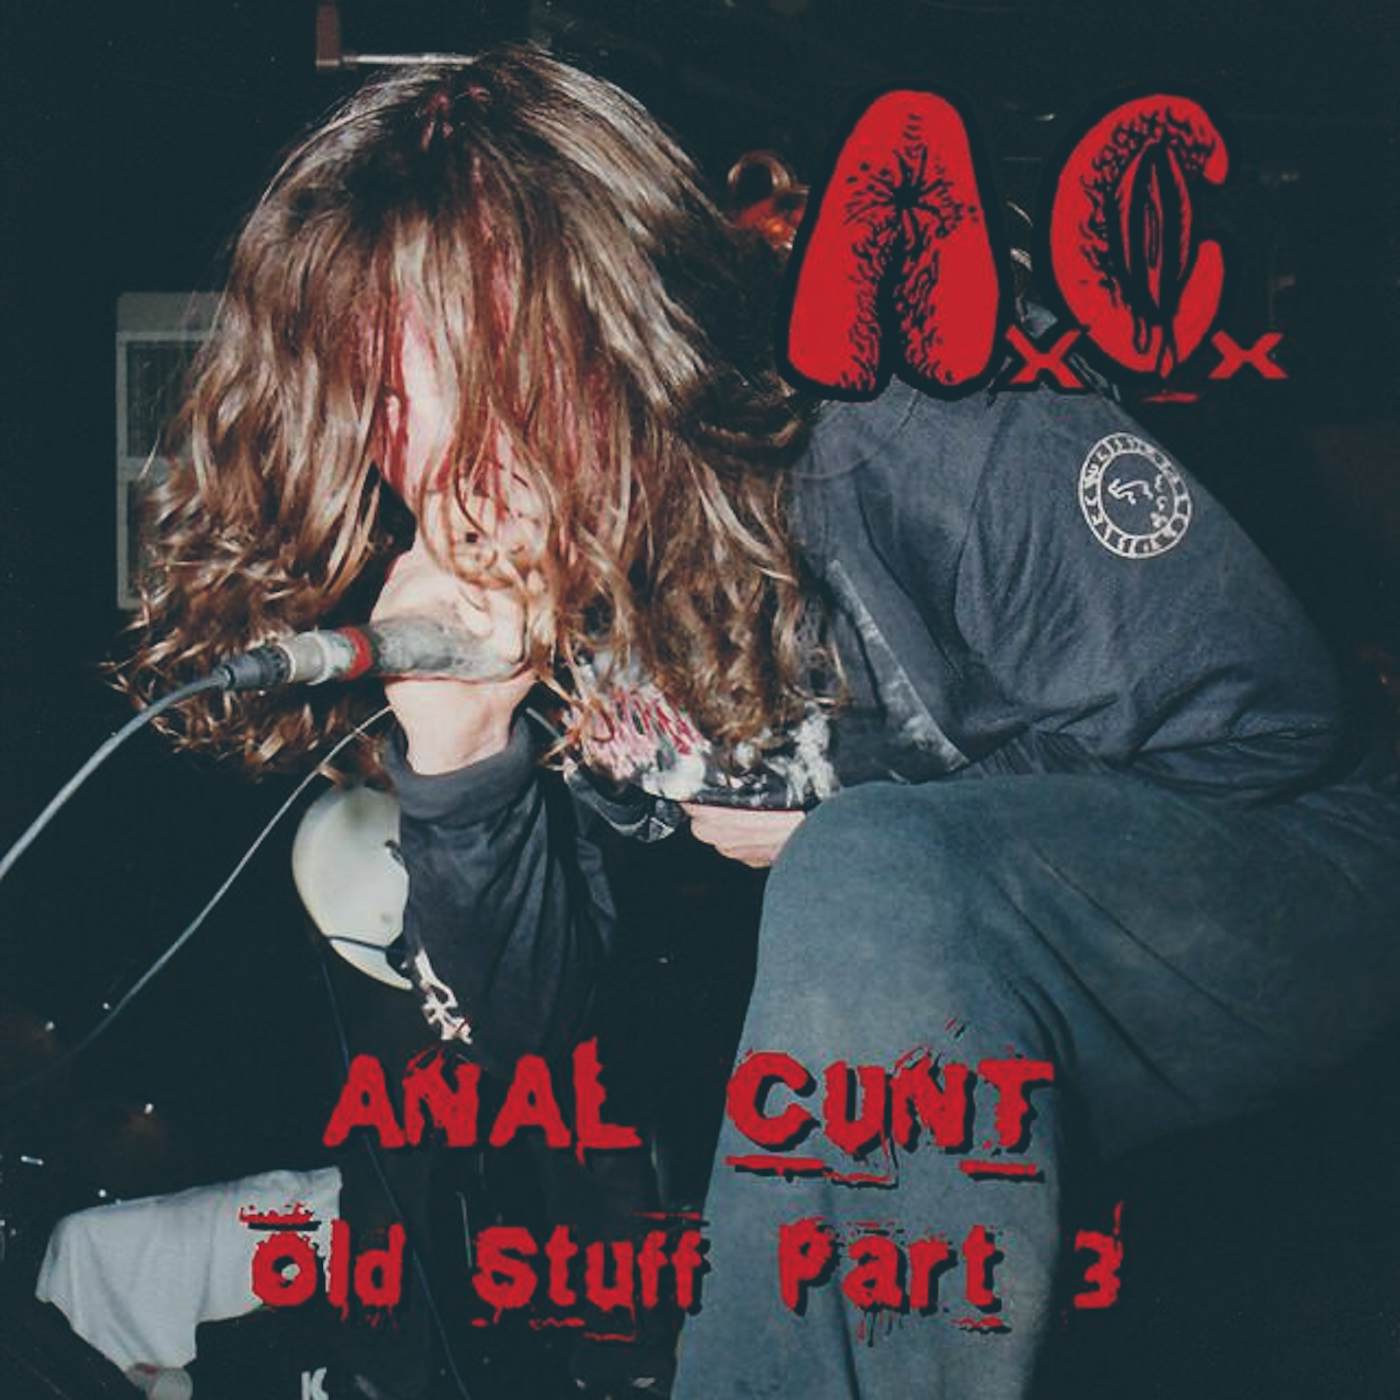 Anal Cunt